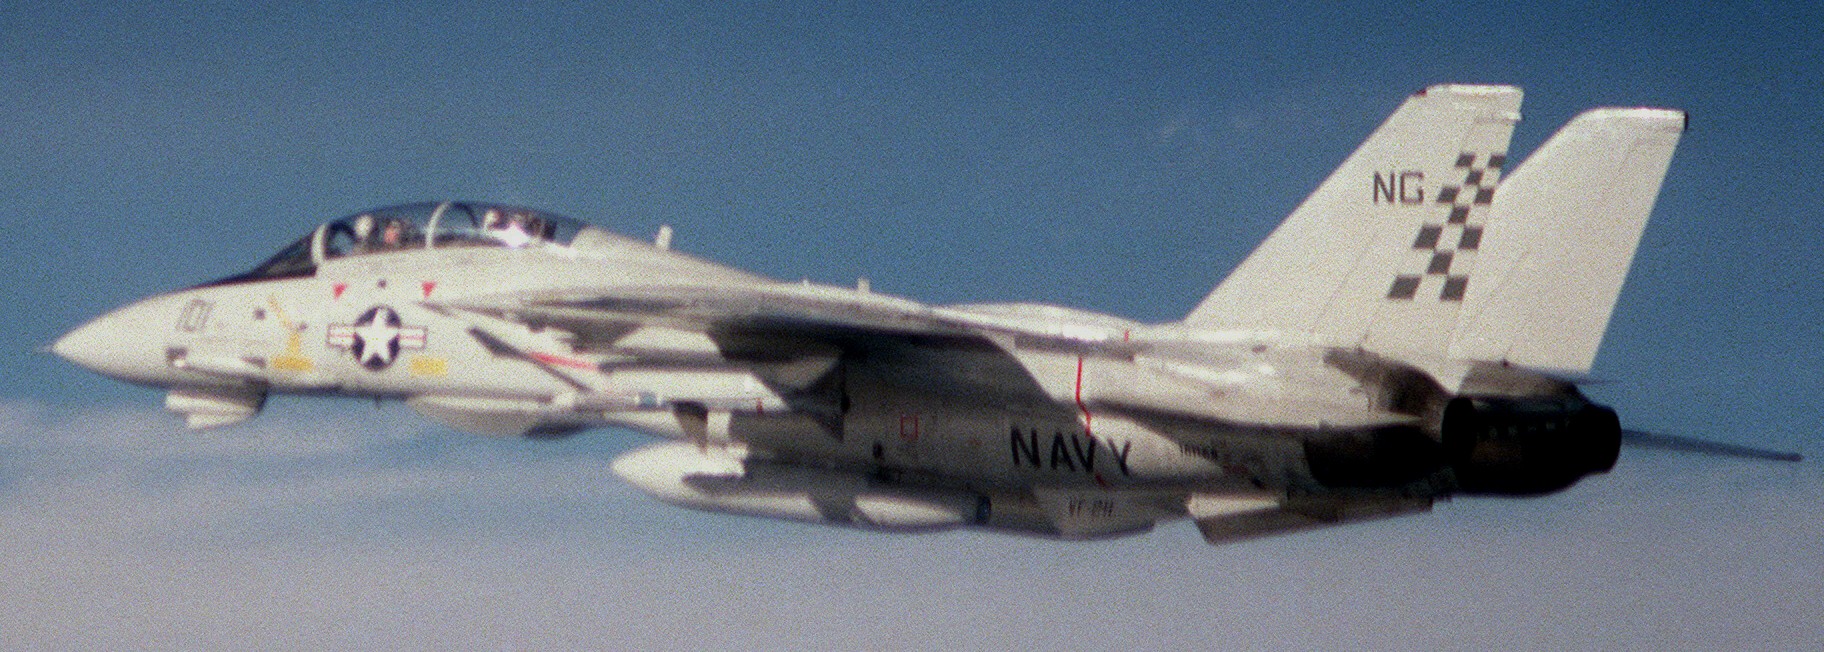 vf-211 fighting checkmates fighter squadron f-14a tomcat us navy carrier air wing cvw-9 uss kitty hawk cv-63 78